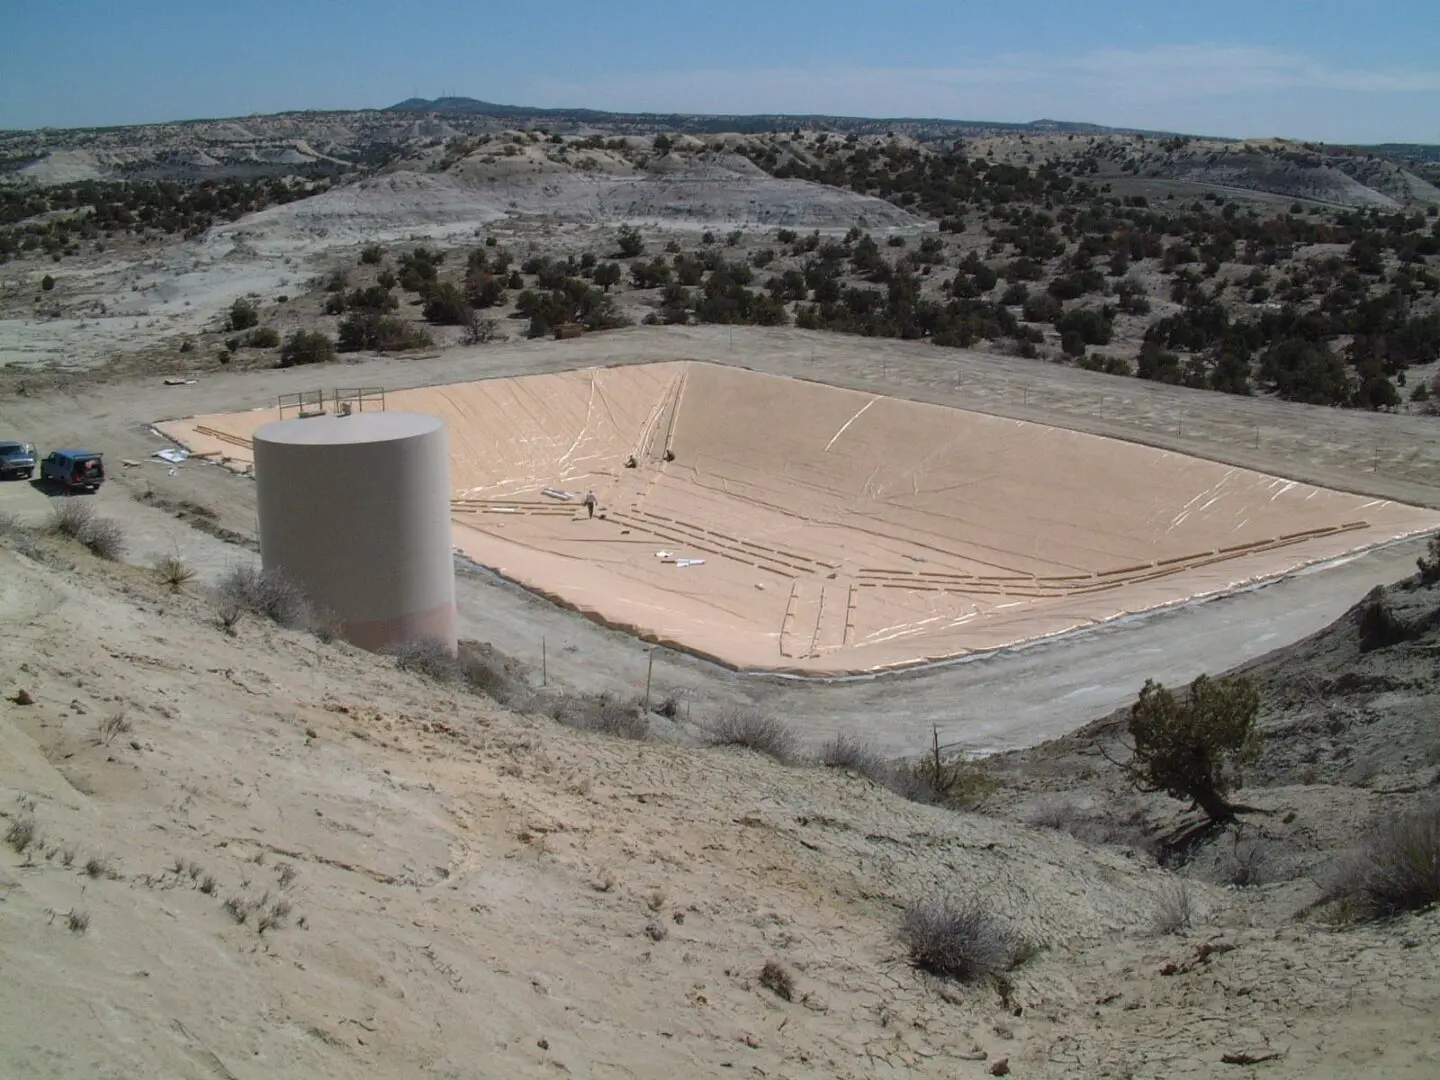 A large sand pit with a water tank in the middle of it.